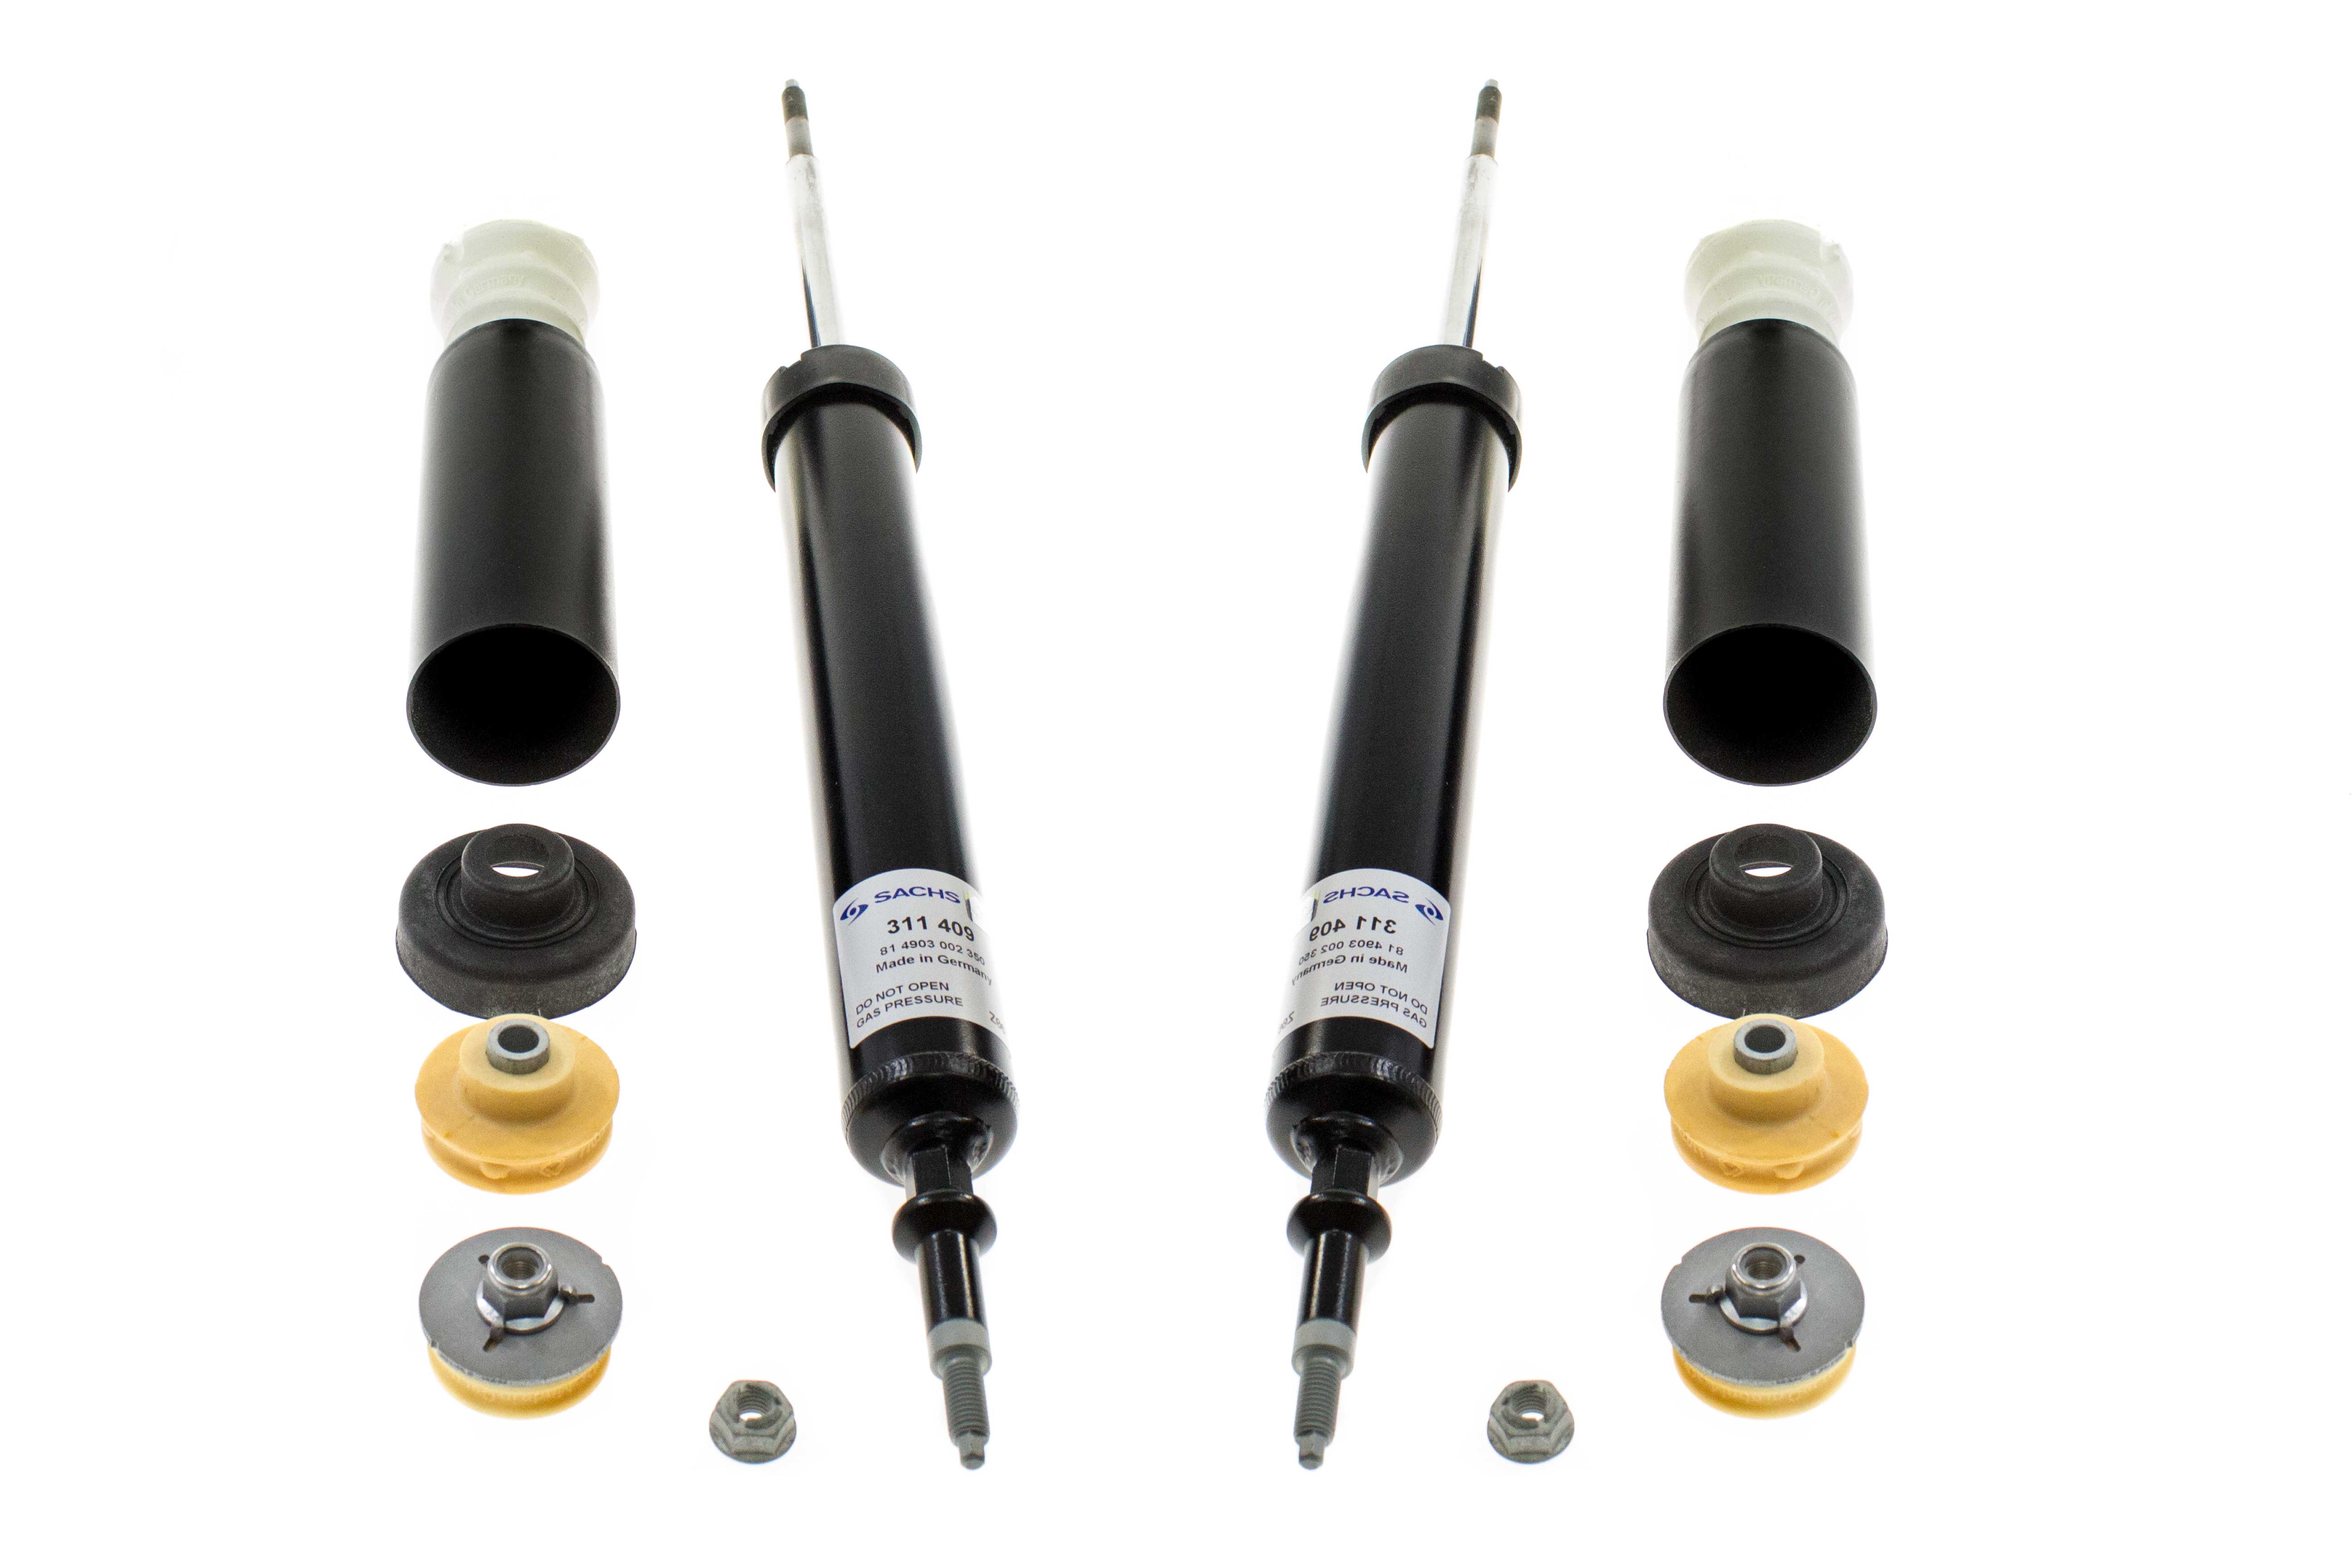 BMW Shock Absorbers - Replacement Shocks for BMW